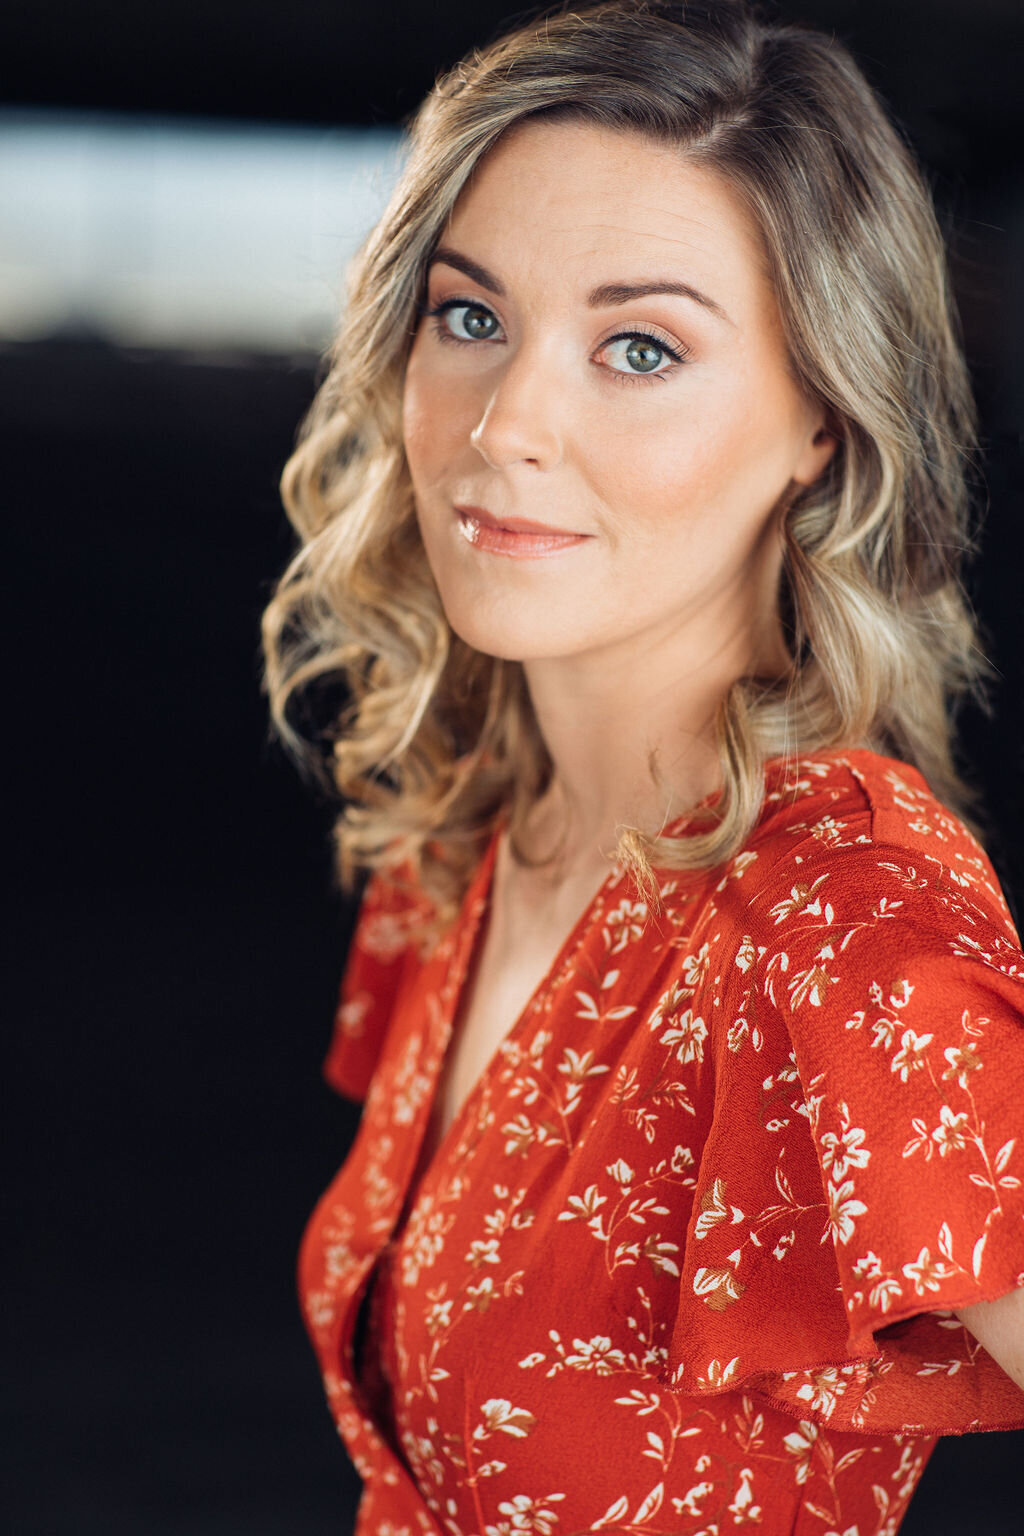 Headshot Photograph Of Young Woman In Red Floral Blouse Los Angeles